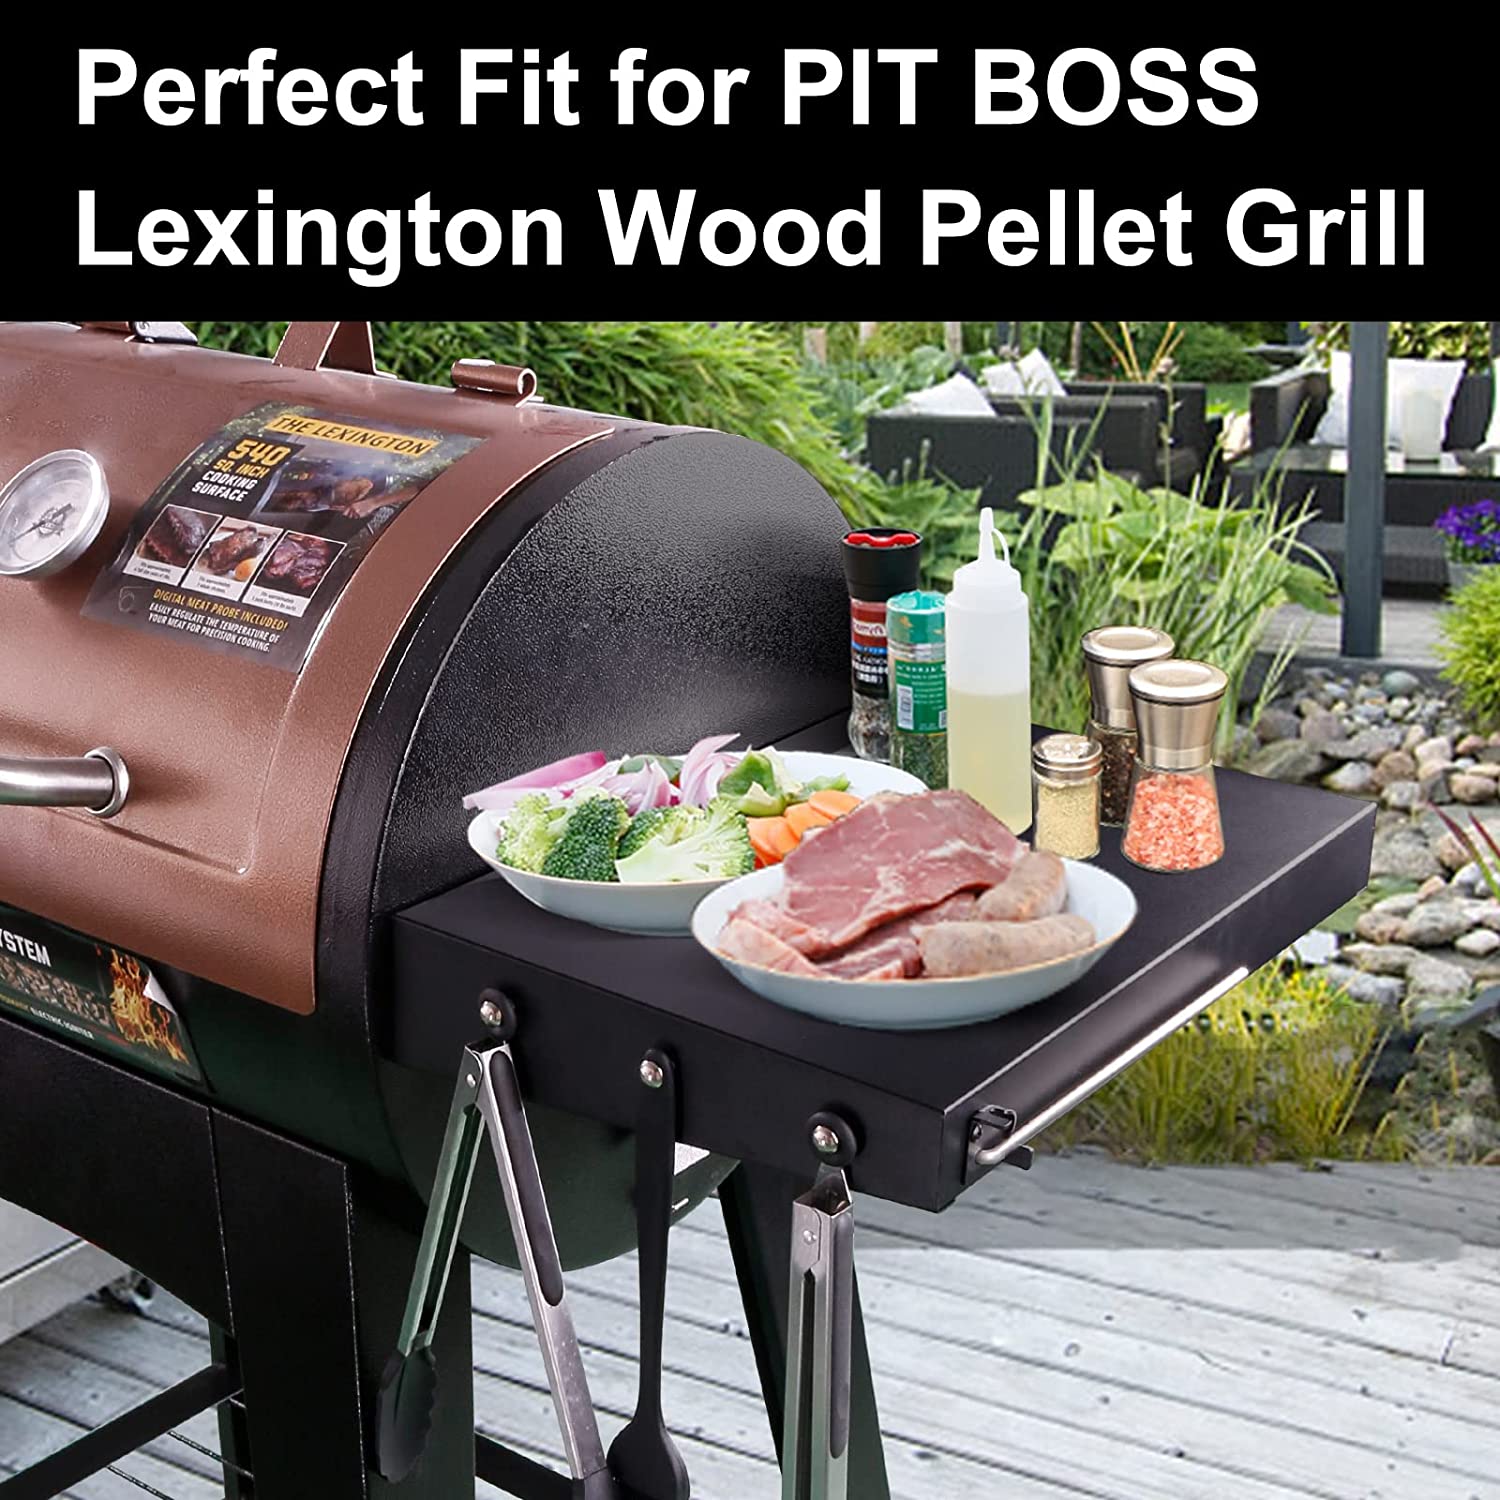 Pit Boss Lexington Review - Great Value, How to Improve + Pit Boss